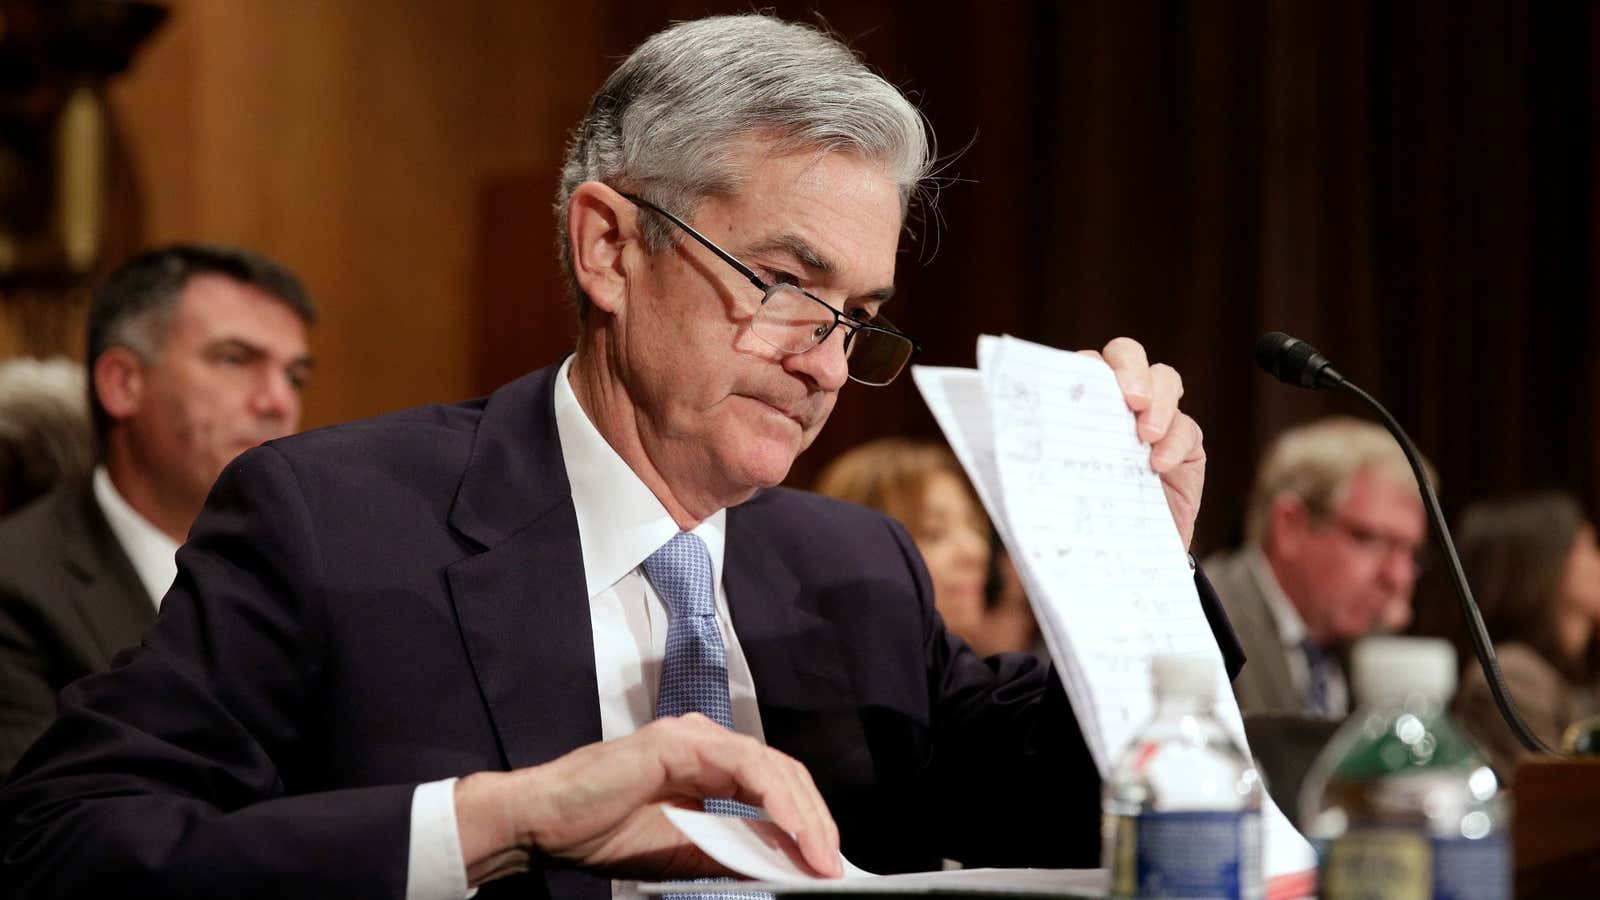 When he became Fed chair, Jerome Powell replaced Janet Yellen, a female PhD economist.